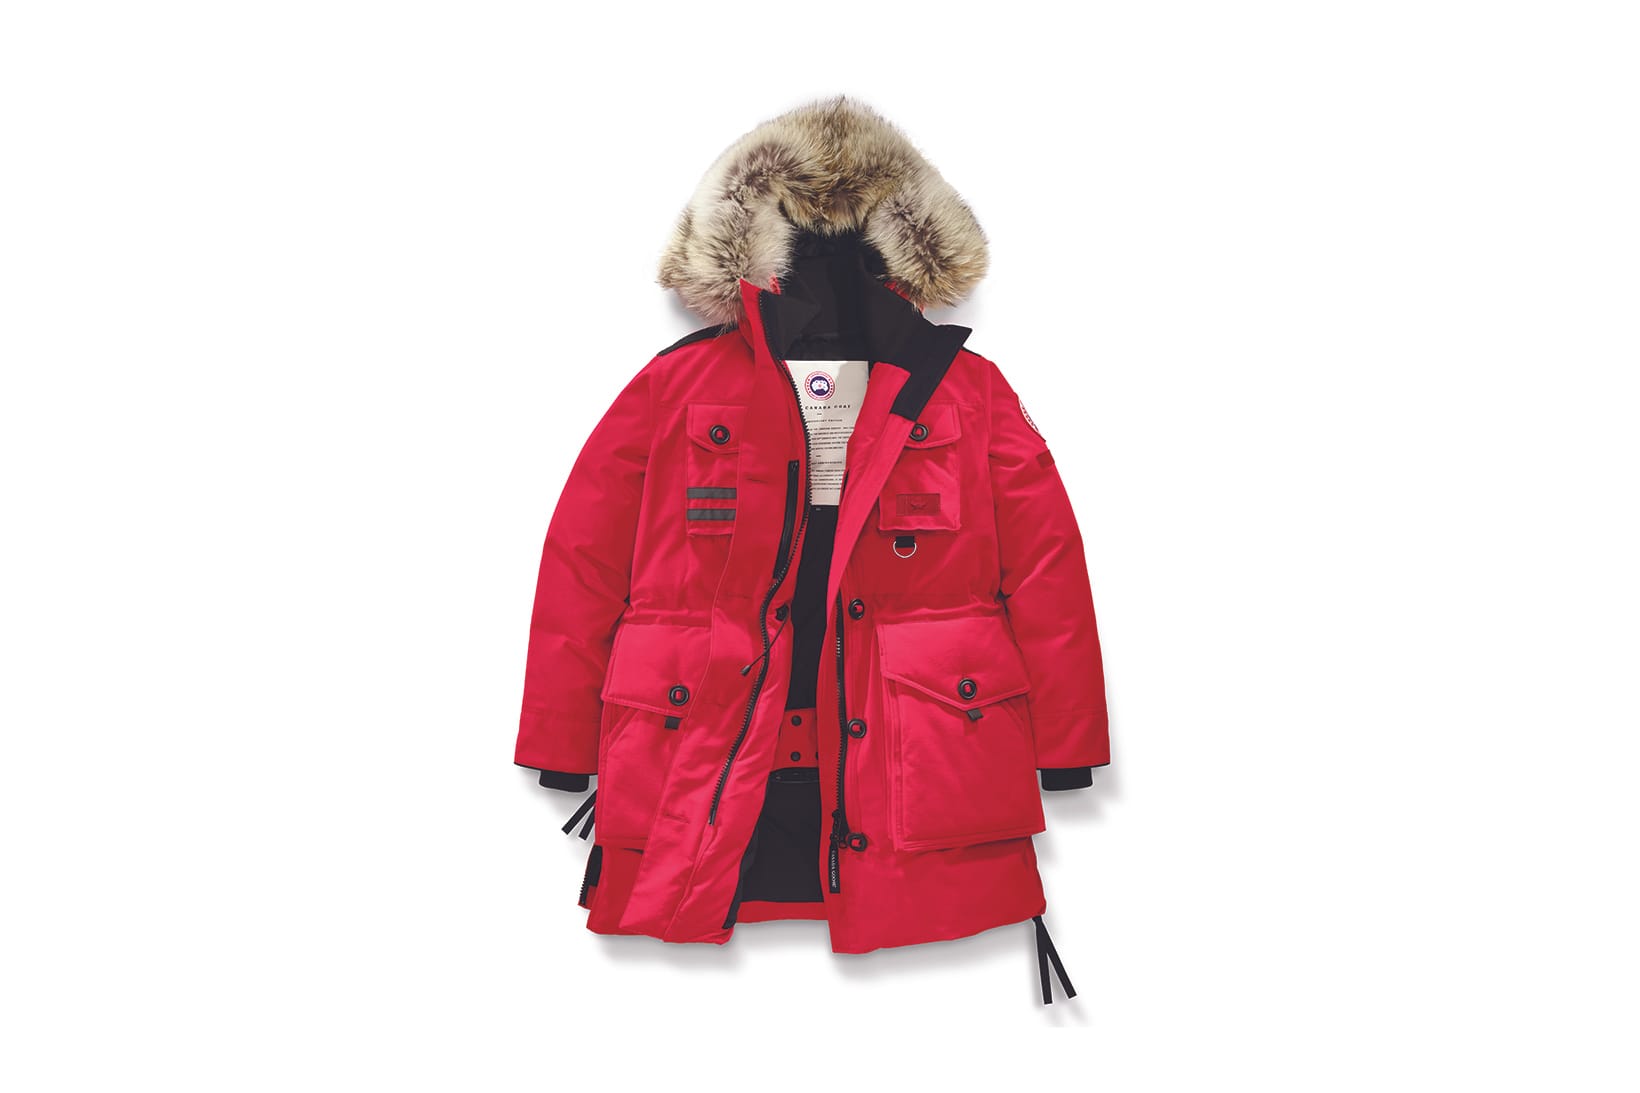 Canada Goose's Limited Edition Canada Coat | HYPEBEAST